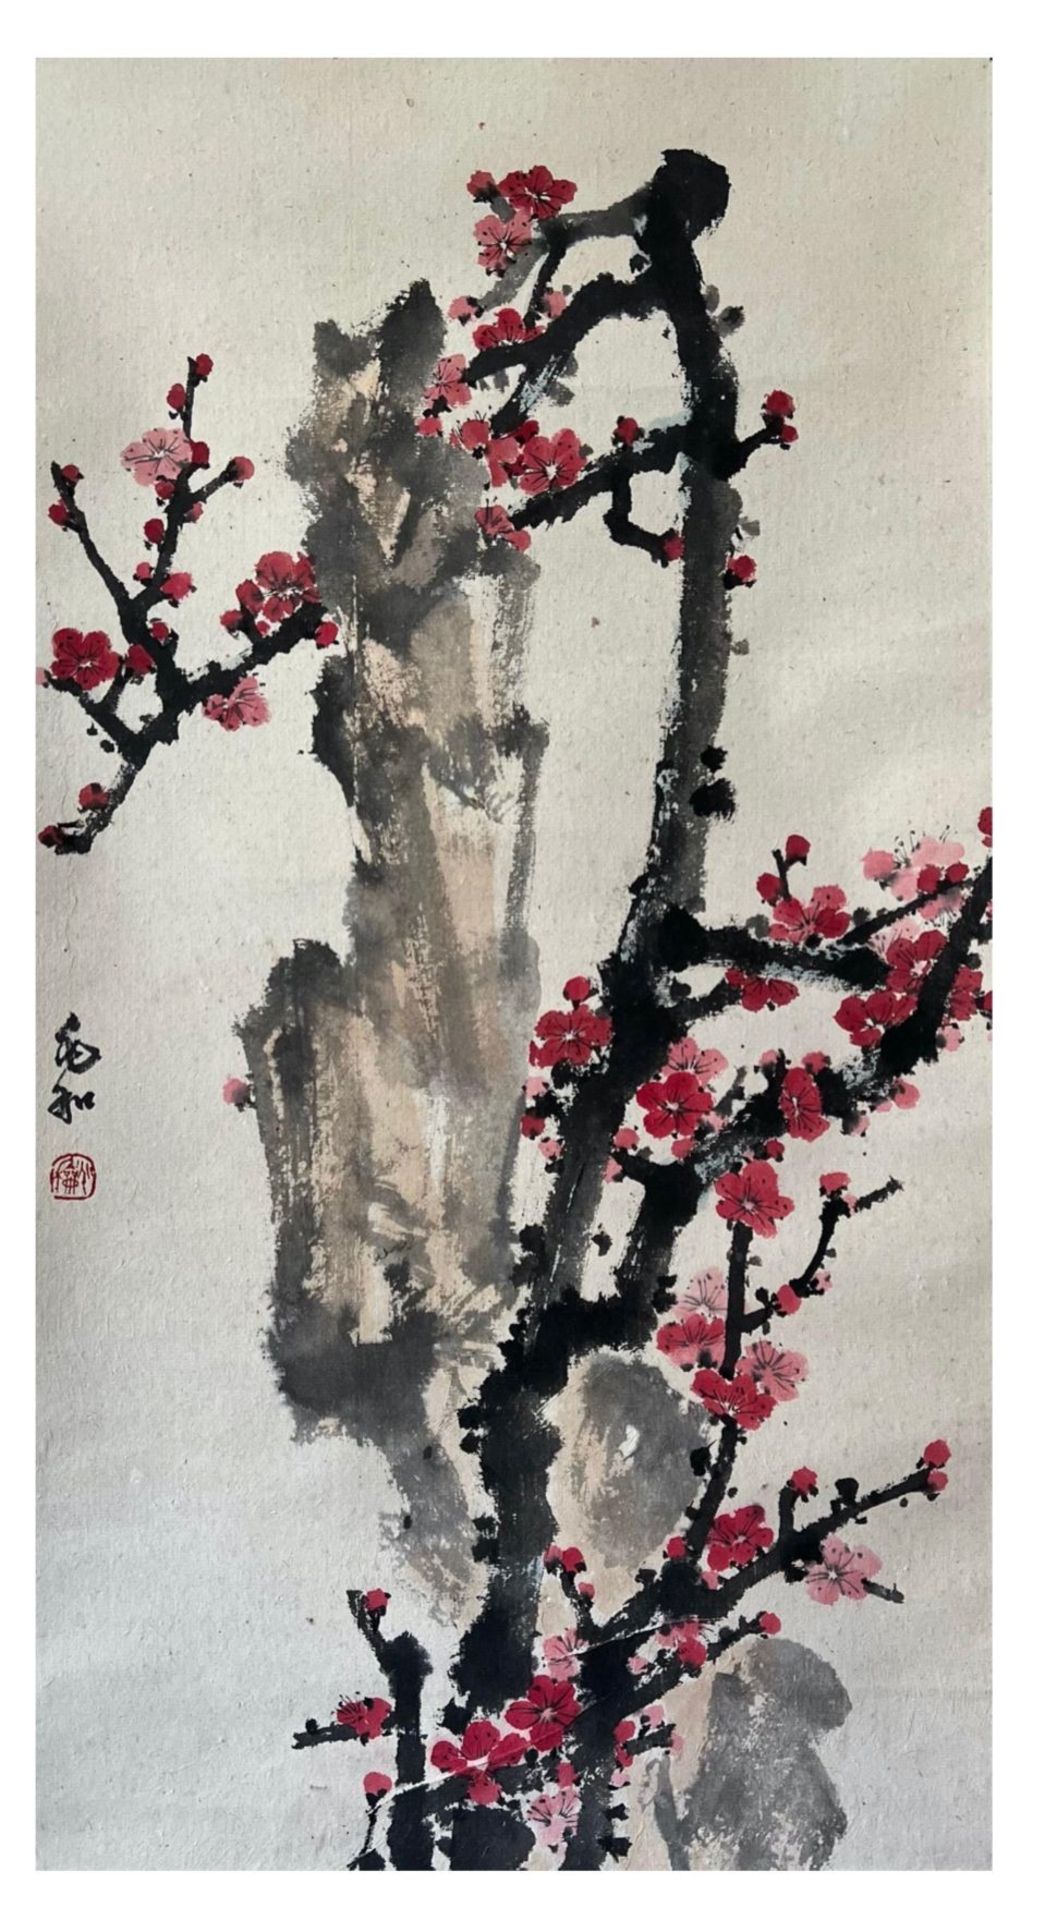 Plum blossom with crimson petals - Chinese ink and watercolour on paper scroll. Attributed to